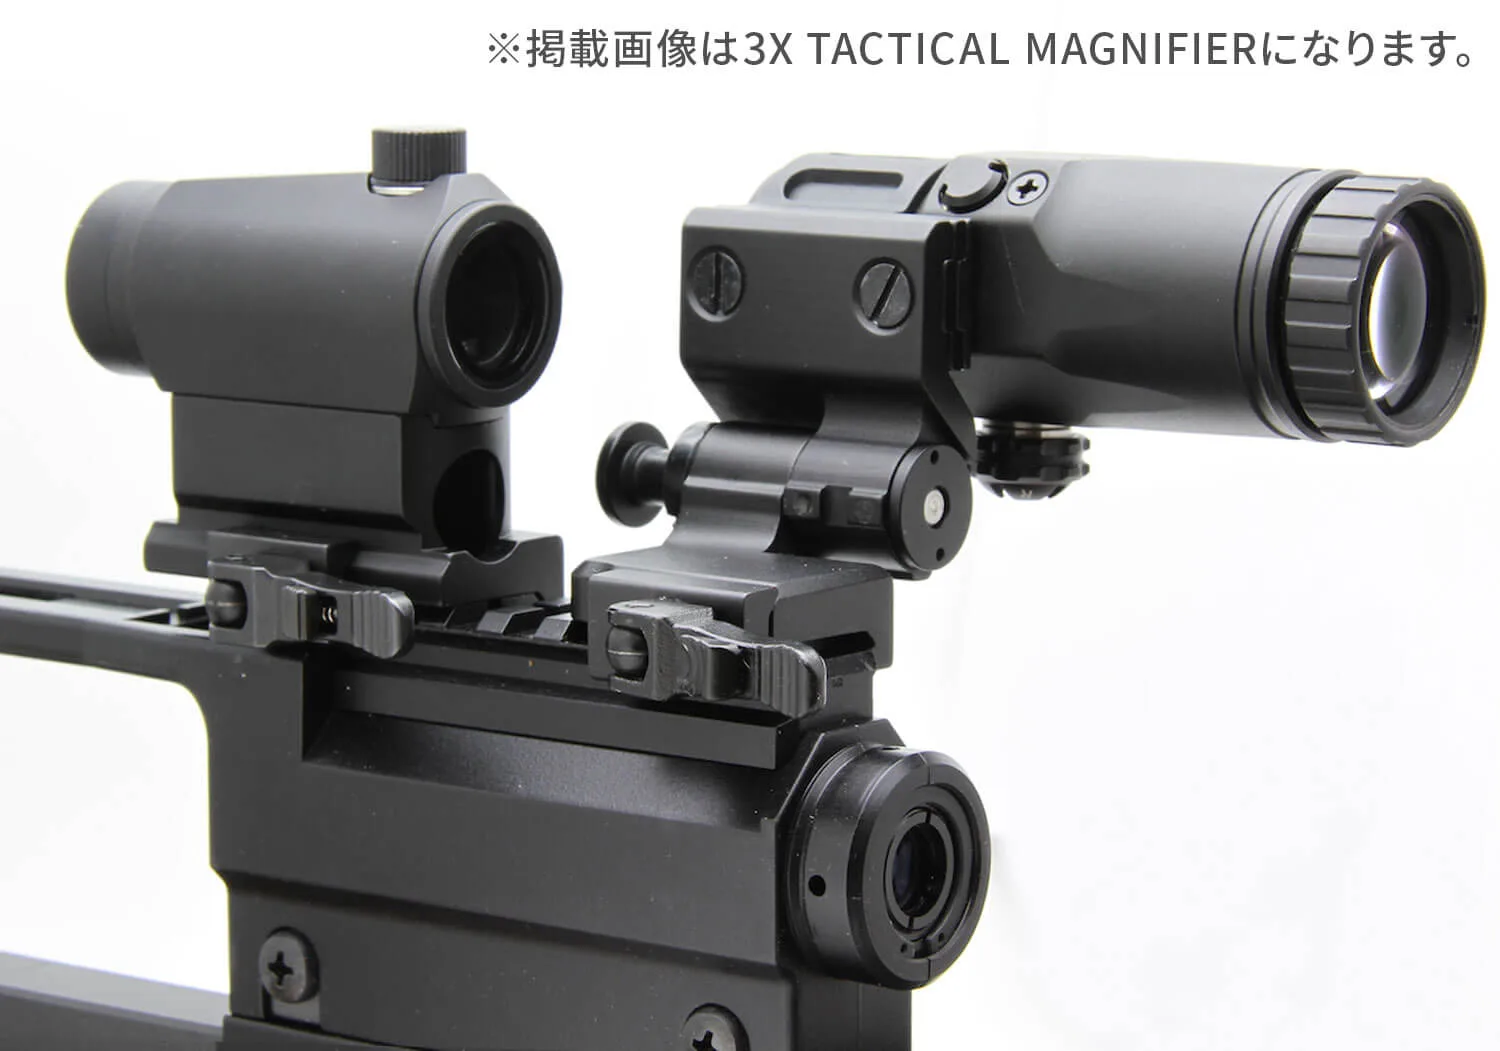 5X TACTICAL MAGNIFIER | MAGNIFIER | ノーベルアームズ 